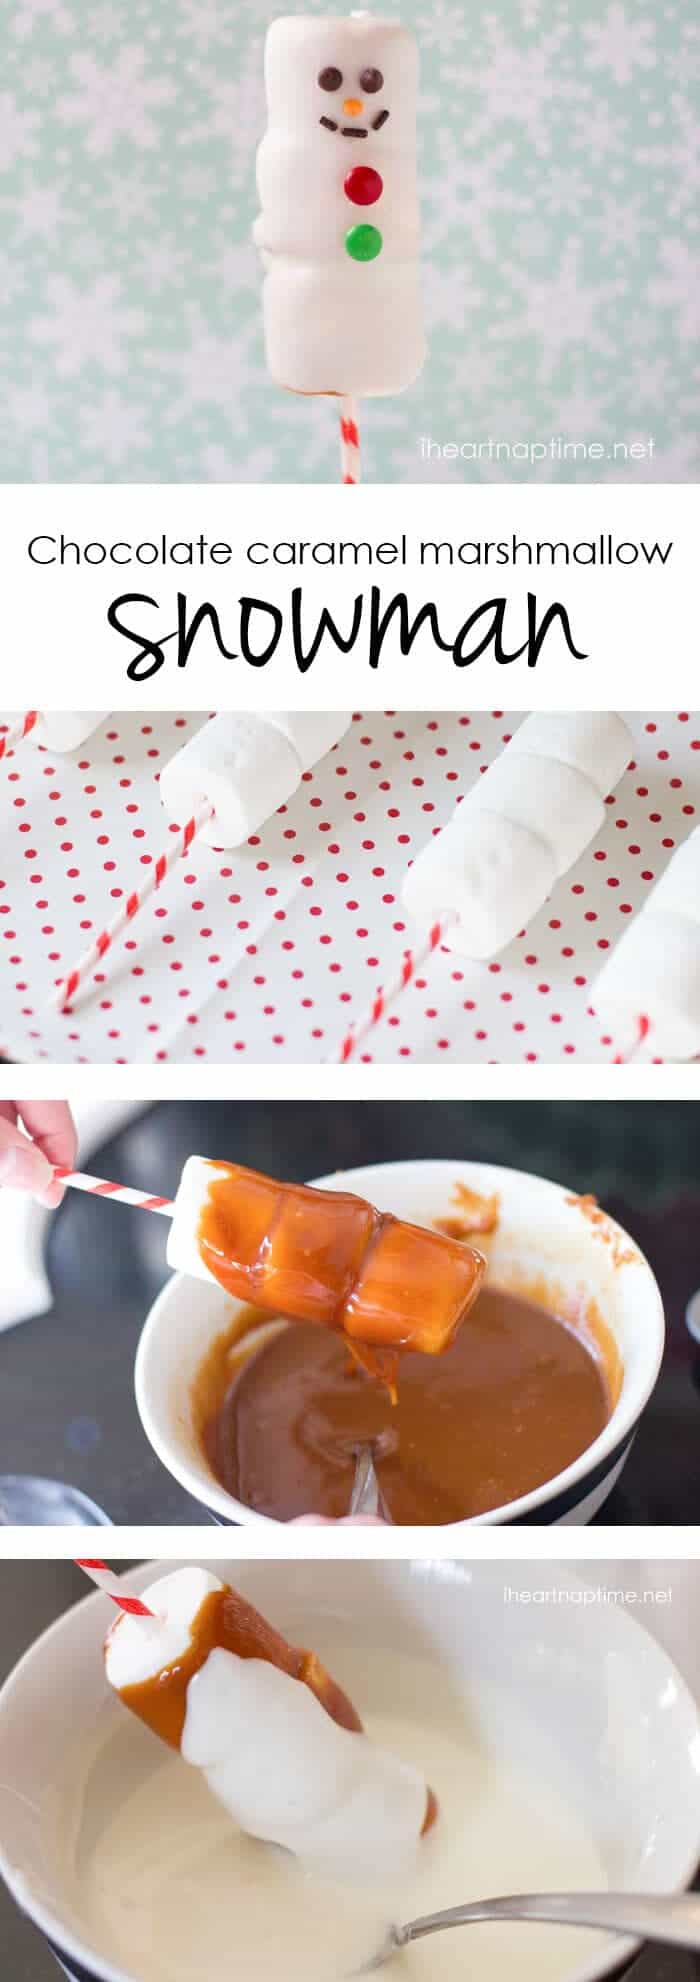 Chocolate caramel marshmallow snowmen on iheartnaptime.net ...such a cute recipe idea for Christmas! Looks like the ones from Disneyland!